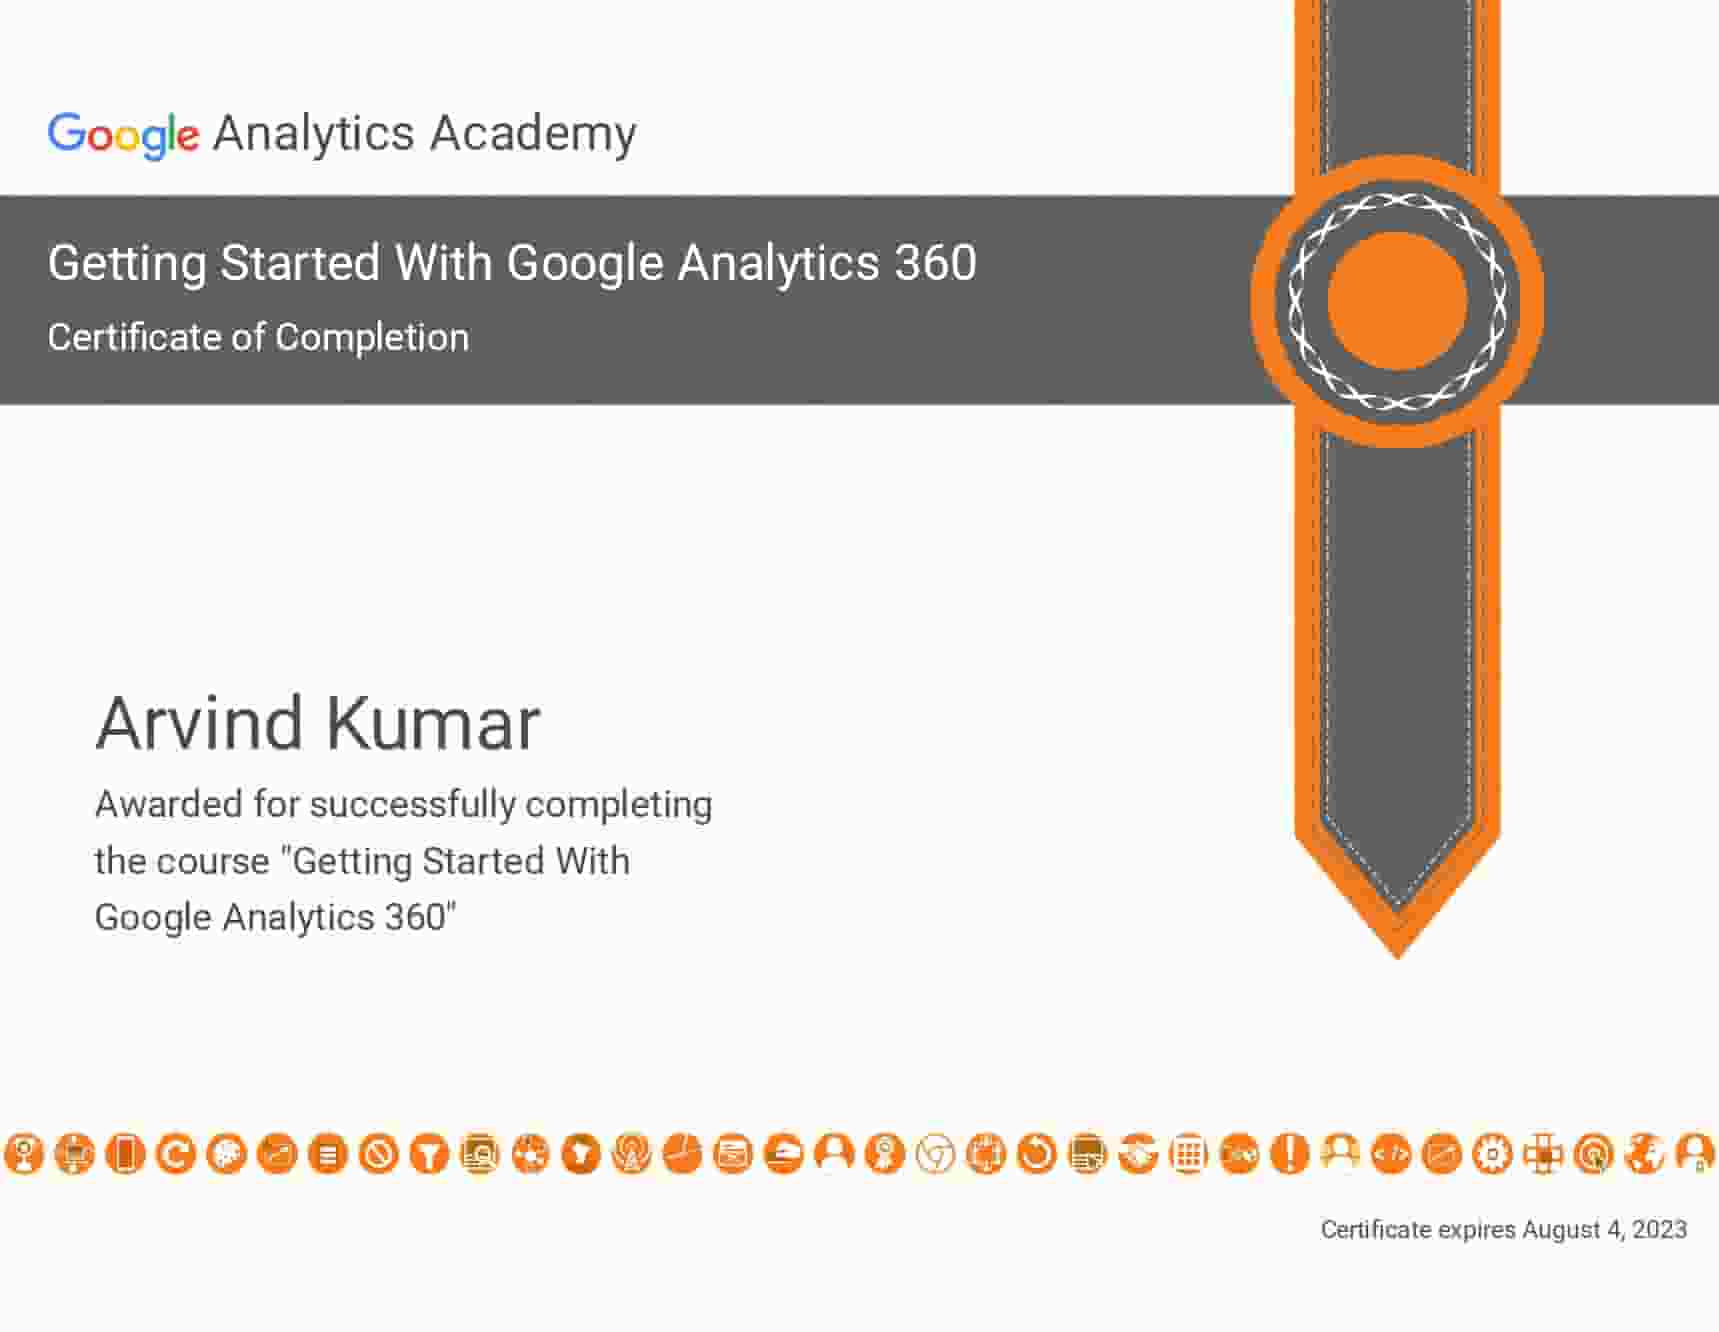 Getting Started with Google Analytics 360